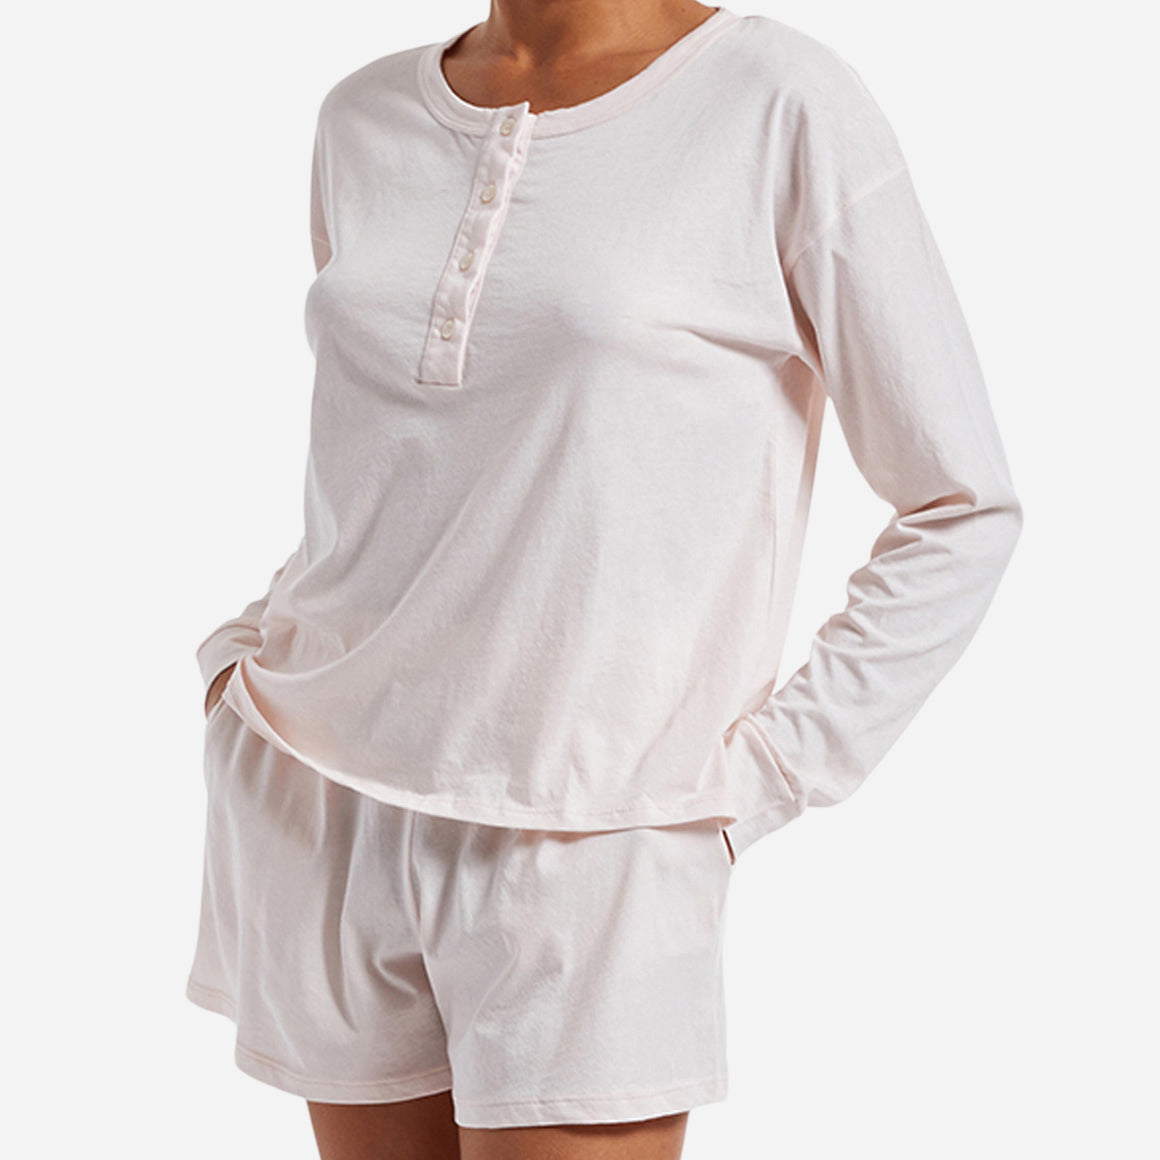 The design of the Chloe PJ Set is as elegant as it is versatile. The classic long sleeve henley shirt features a relaxed fit and a flattering neckline. The cozy shorts offer a comfortable, yet flattering silhouette, with side seam pockets and an elastic waistband ensuring a personalized fit for all body types.